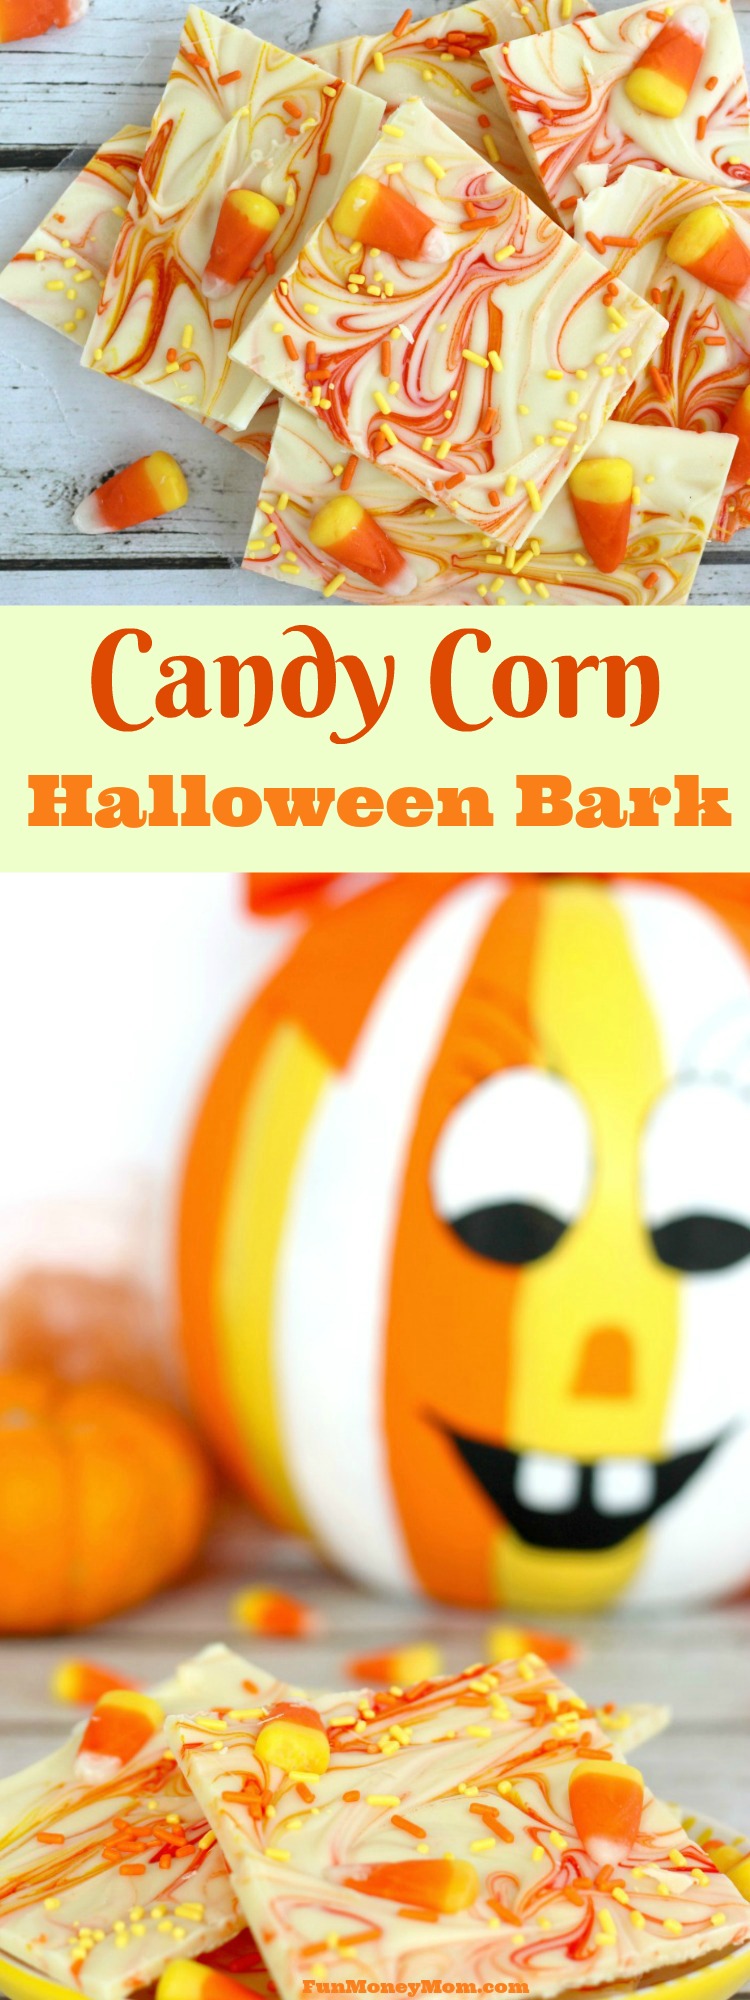 Need a fun Halloween treat? This Candy Corn Halloween Bark is both easy to make and fun to eat! It's perfect for Halloween parties or just a white chocolate Halloween treat.